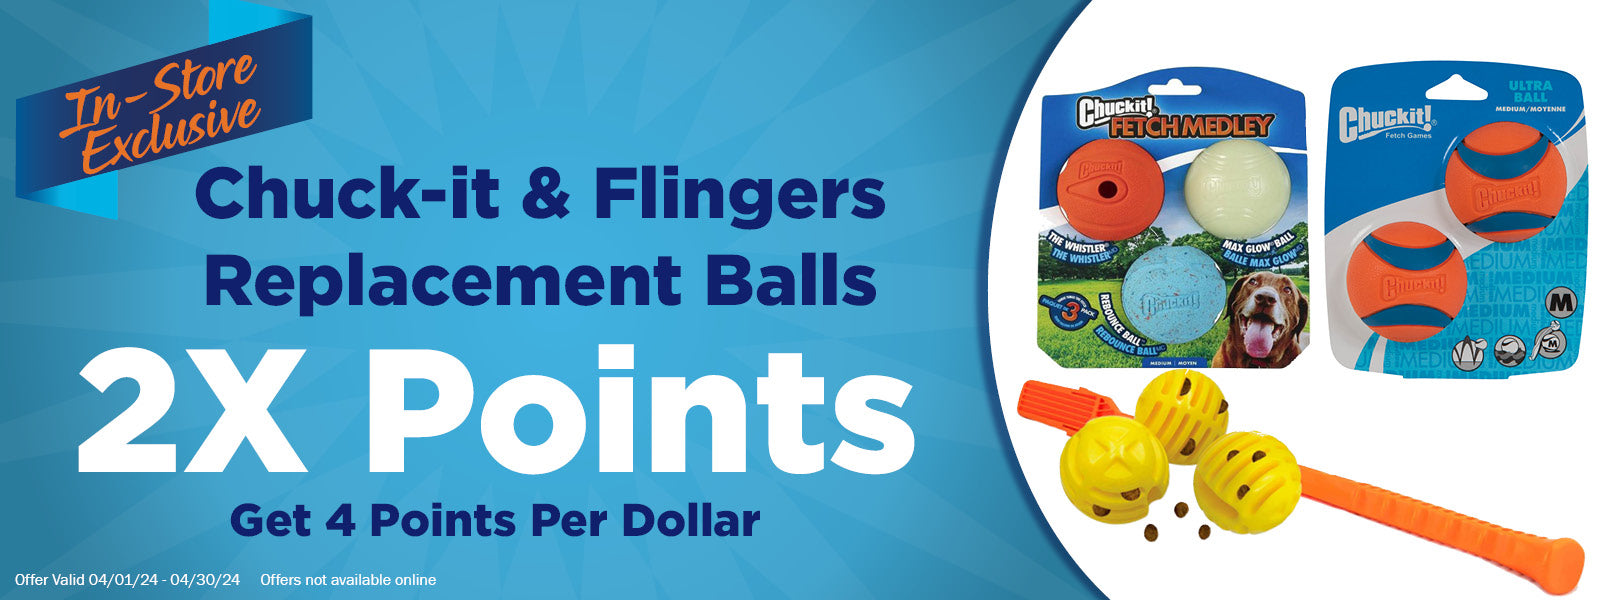 In-Store Exclusive Offer - 2x Points on all Replacement Balls for Launchers